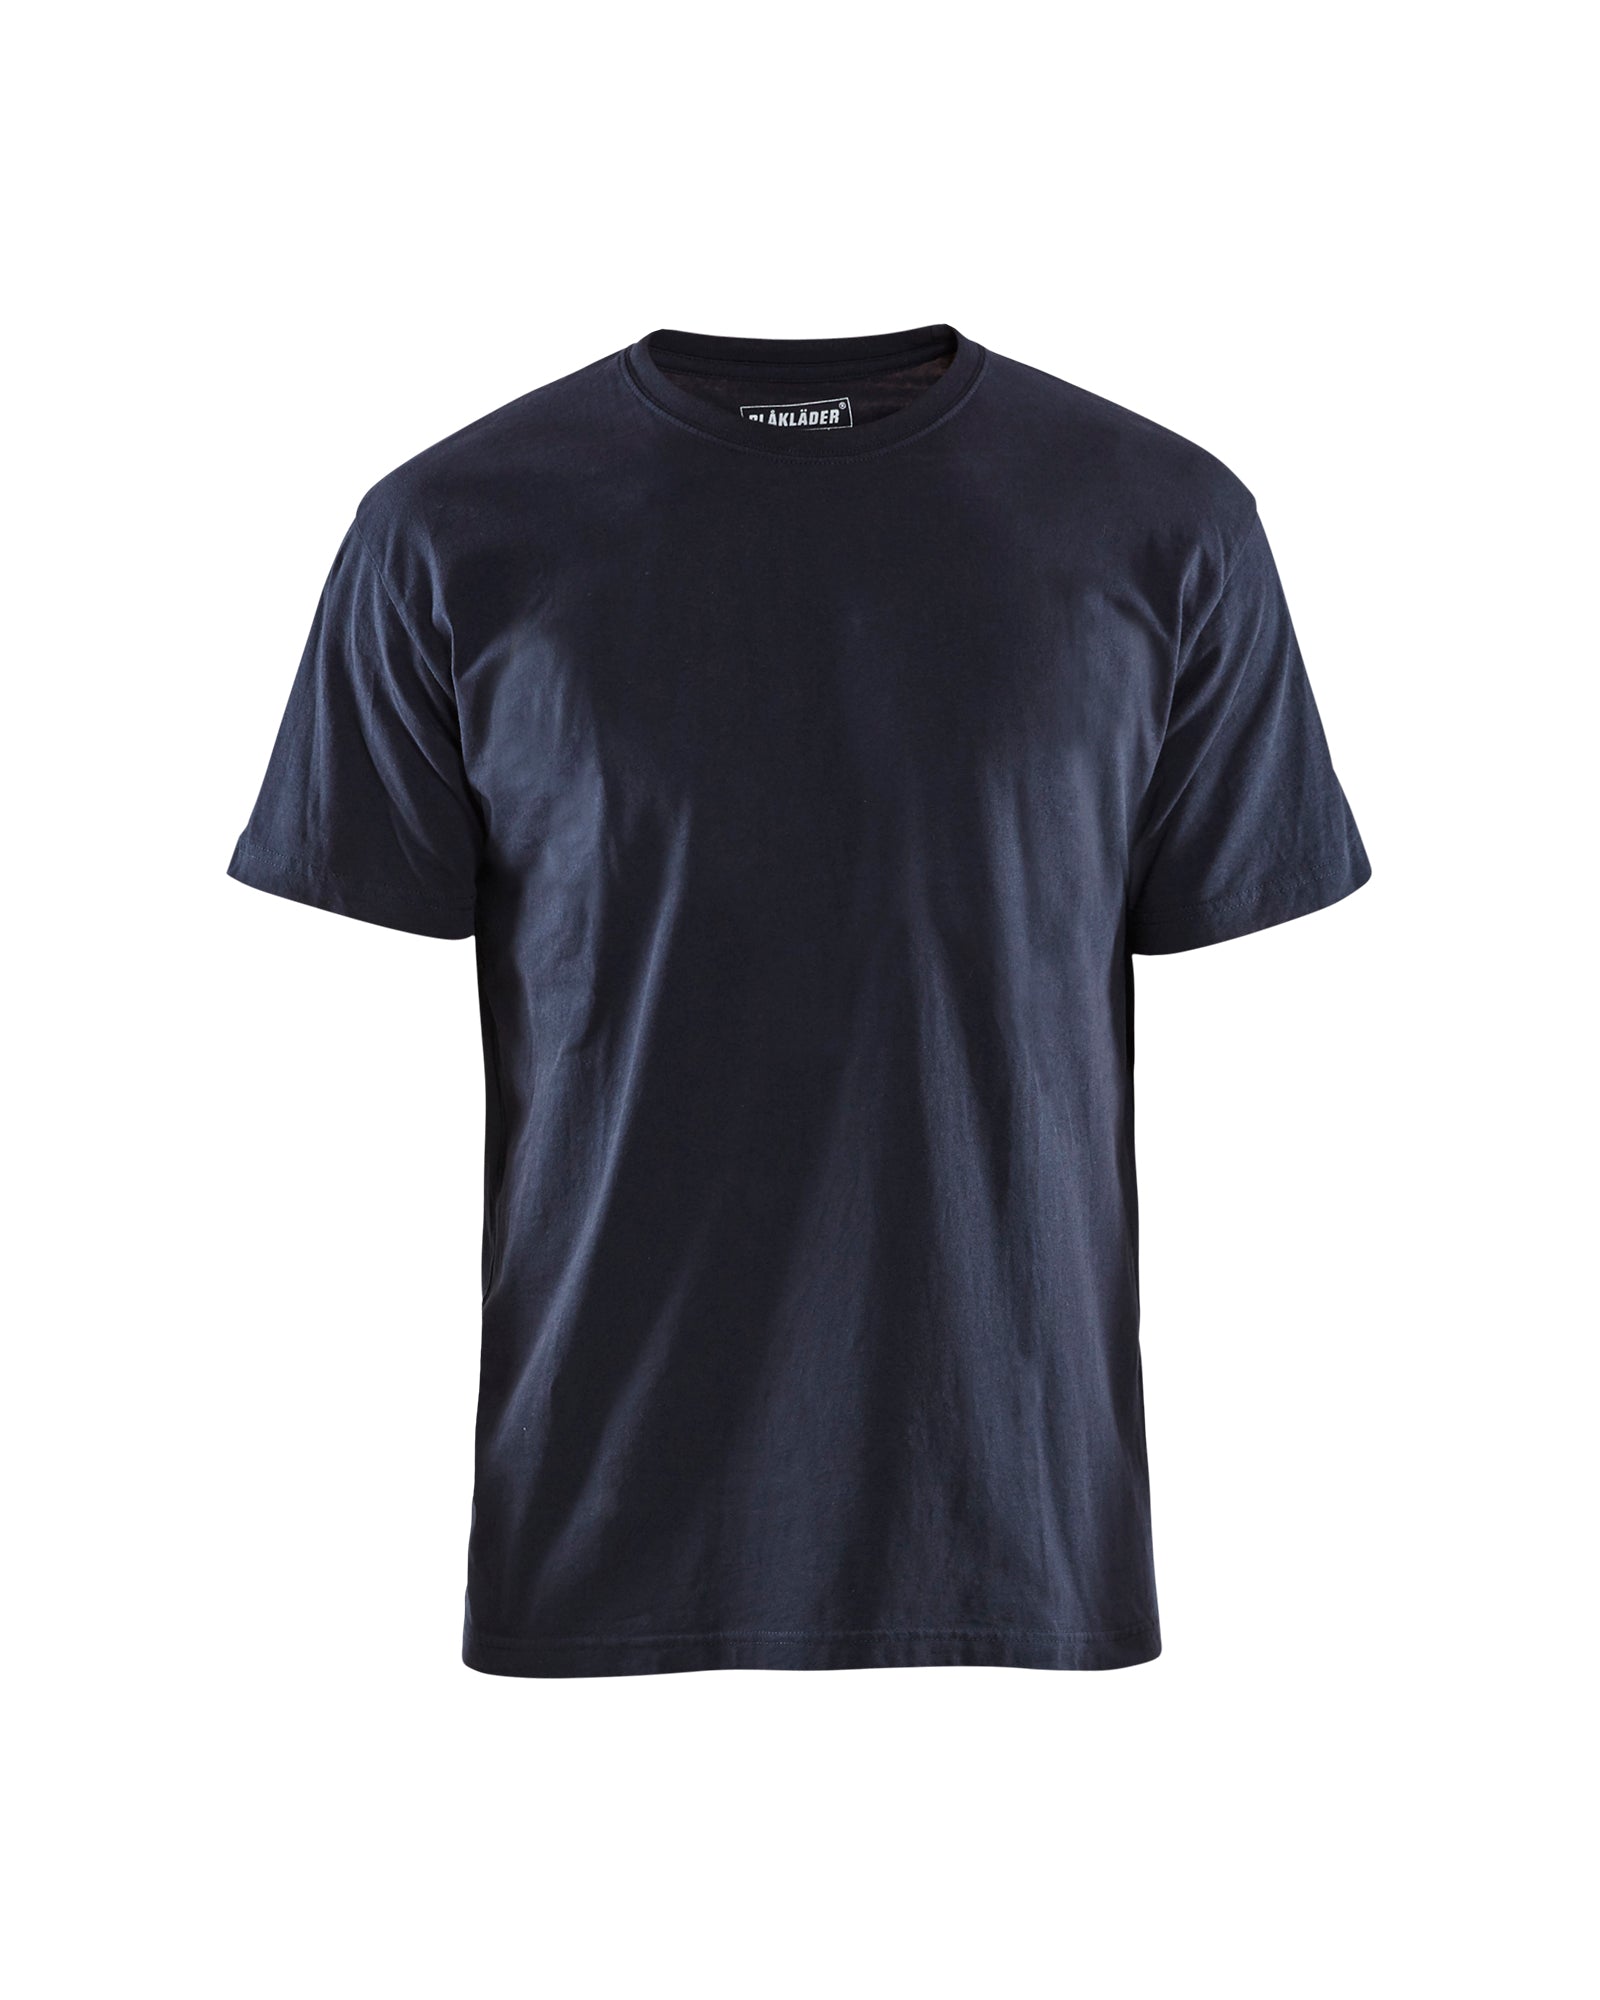 Men's Blaklader US Short Sleeves T-Shirt in Navy Blue from the front view